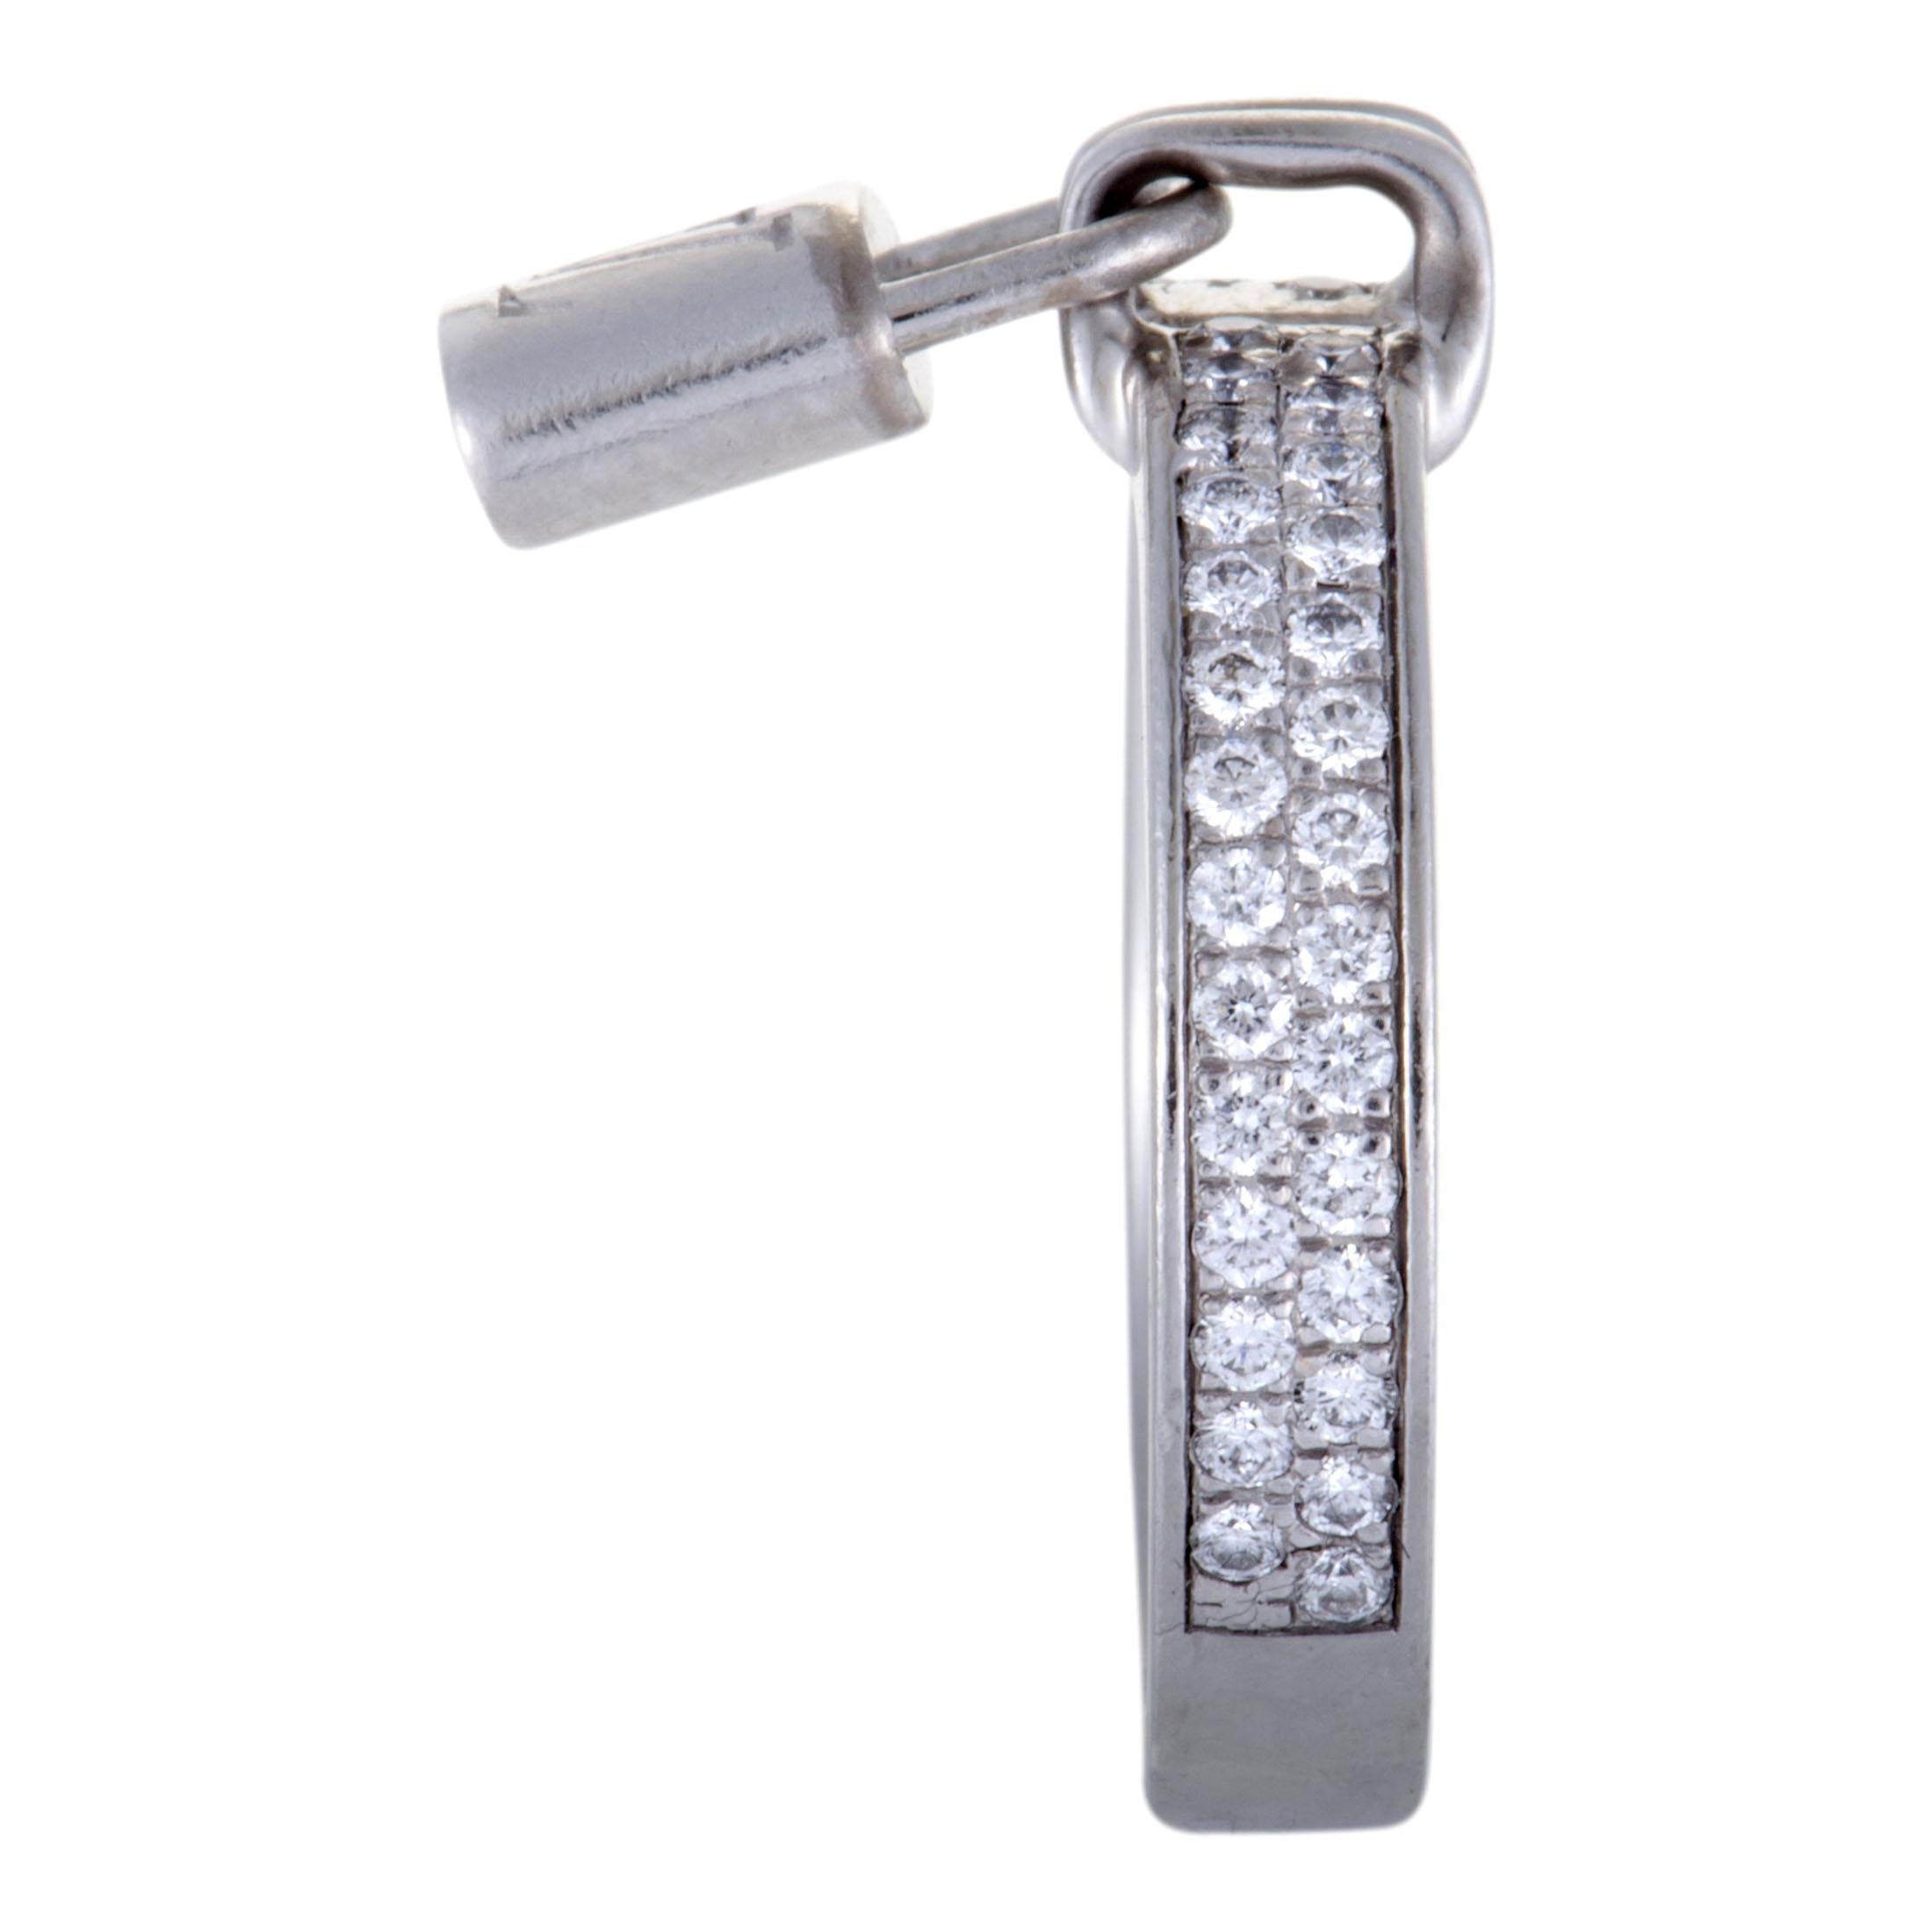 Jewelry of the day: 18k pave diamond lock pendant with Louis